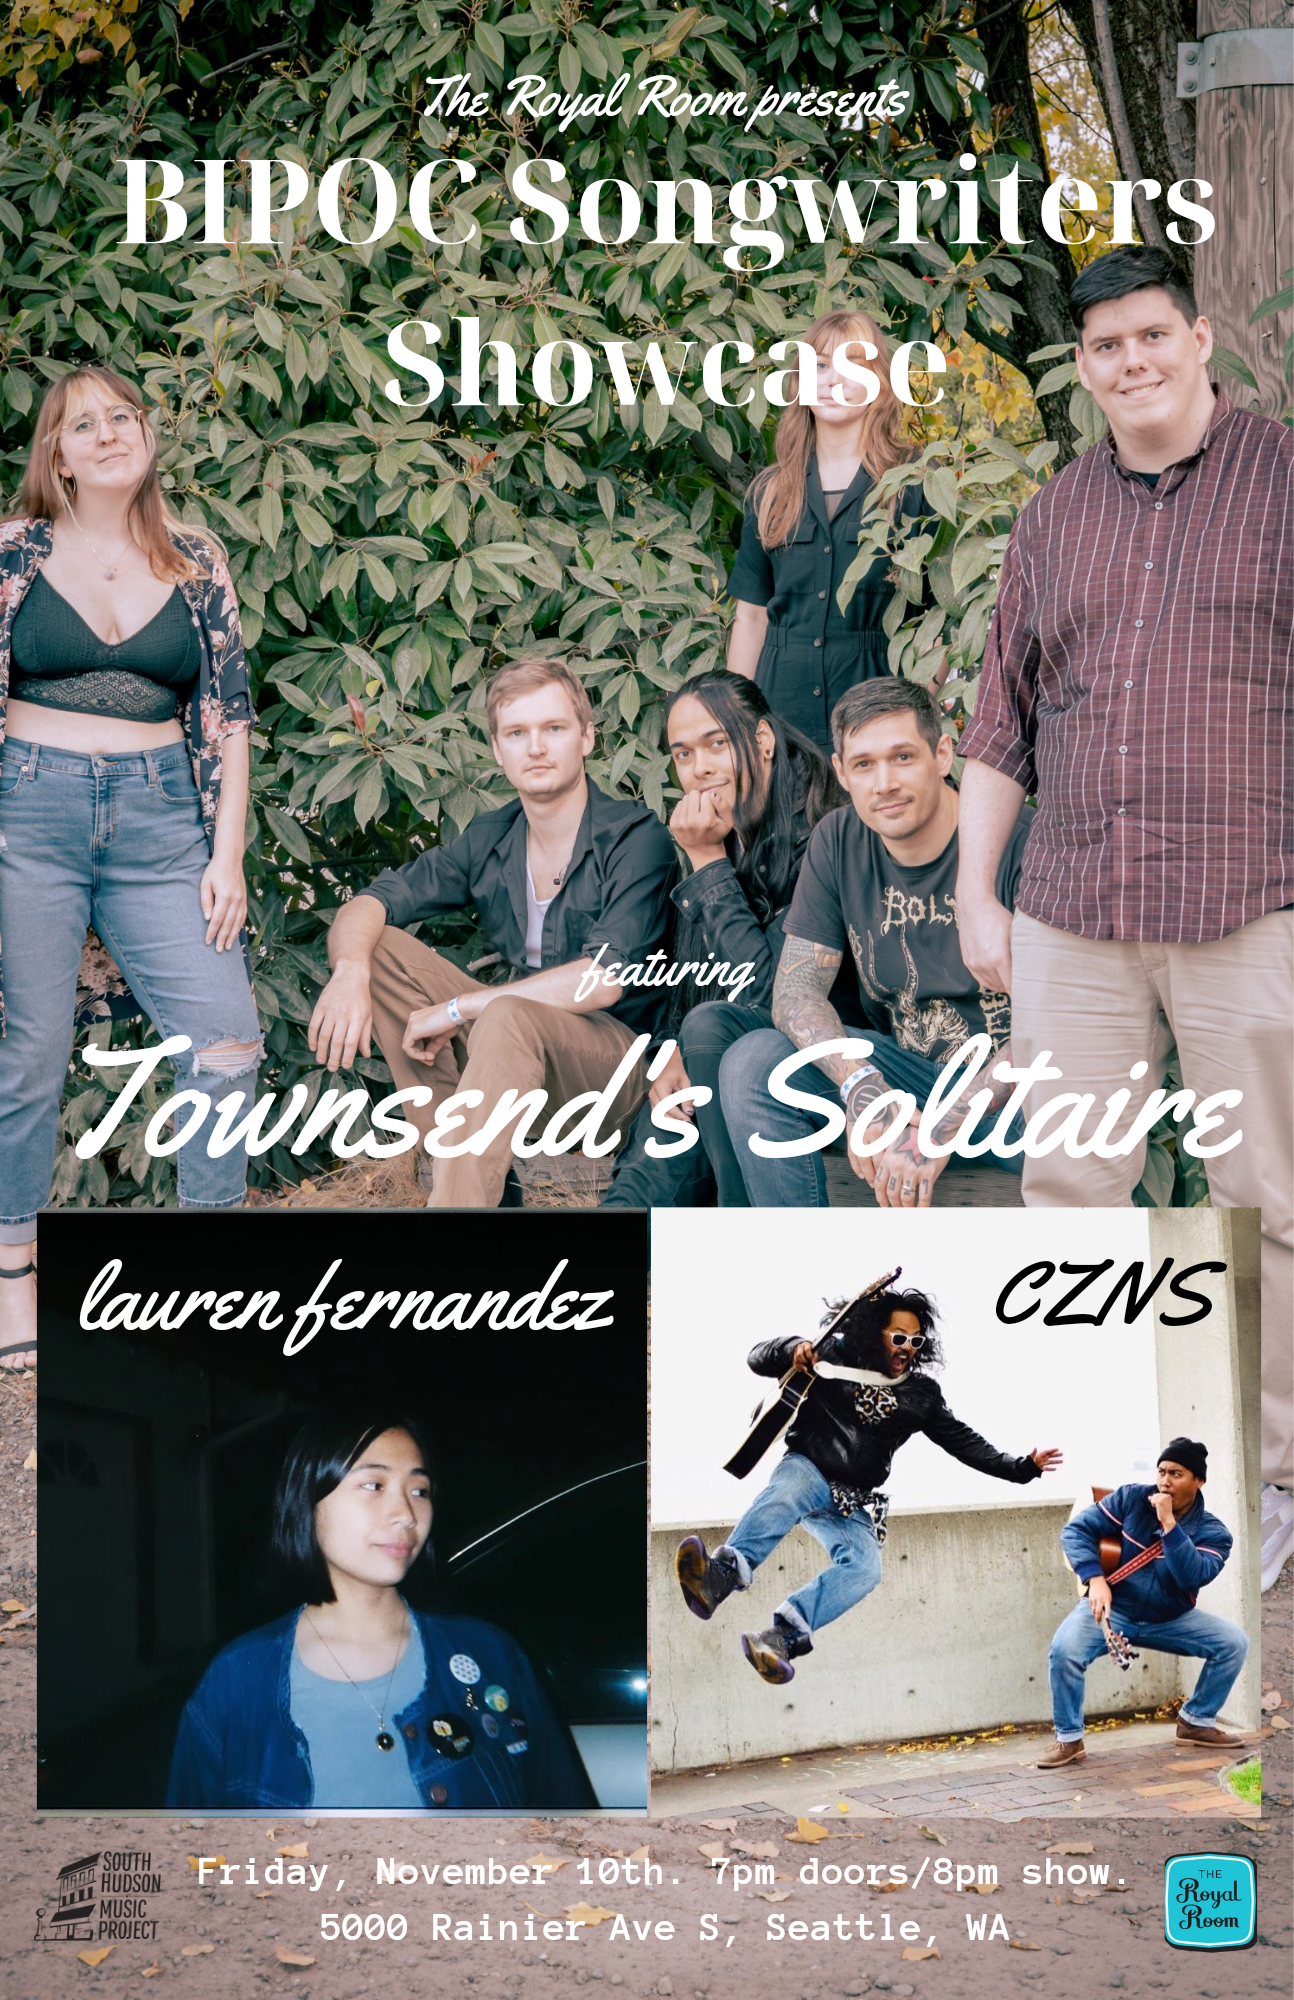 BIPOC Songwriters Showcase  featuring Townsend’s Solitaire, CZNS, Lauren Fernandez